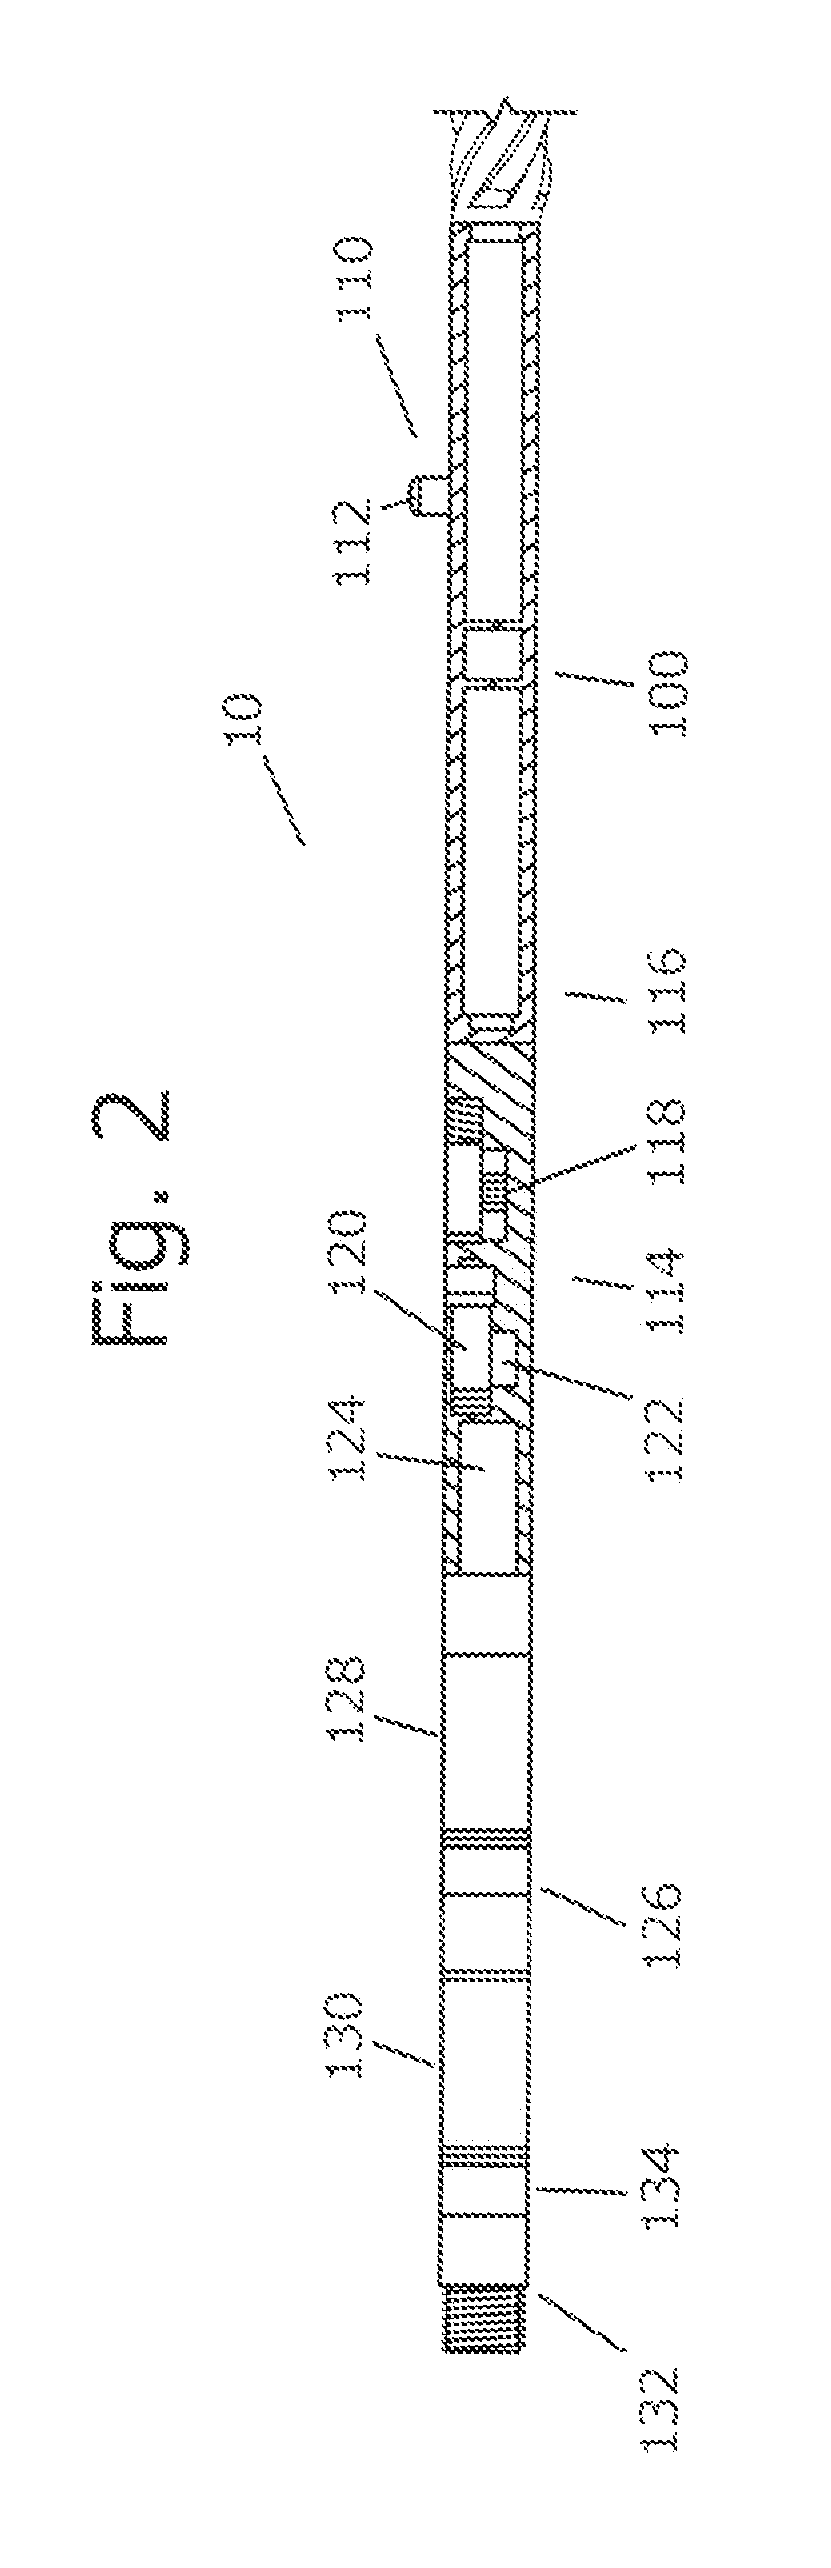 Downhole Spectroscopic Detection of Carbon Dioxide and Hydrogen Sulfide